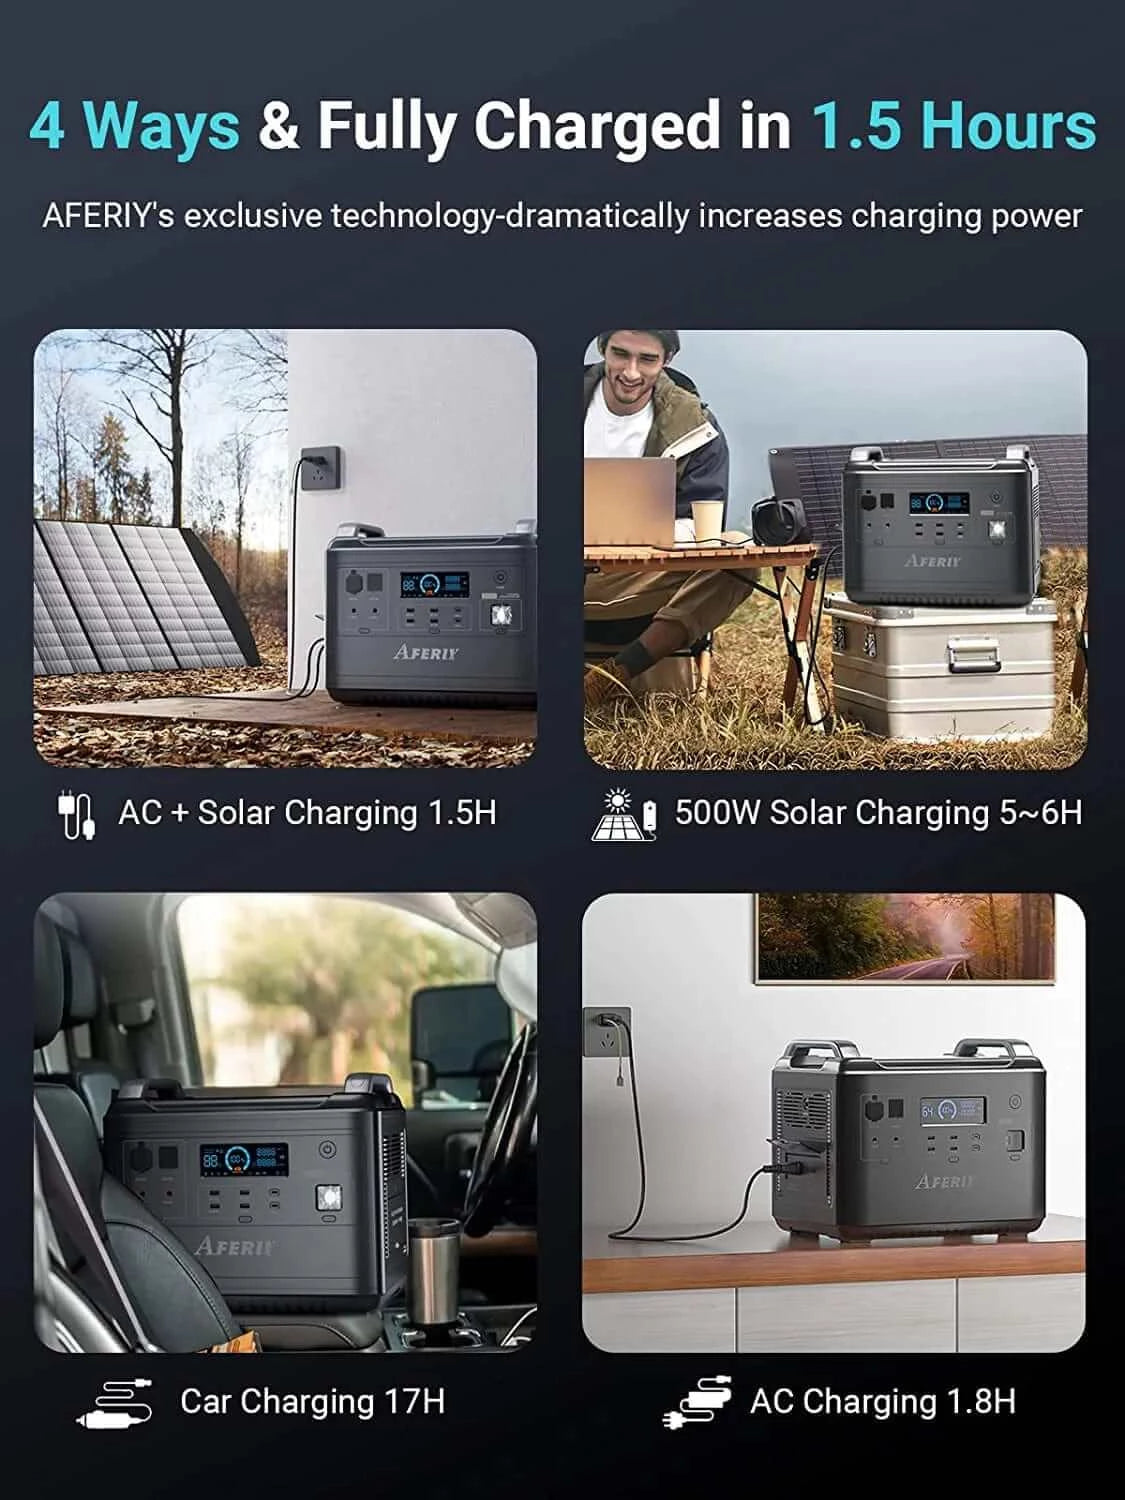 2000 Watt Portable Power Station - 1997Wh: AFERIY 2001A - Ways To Charge